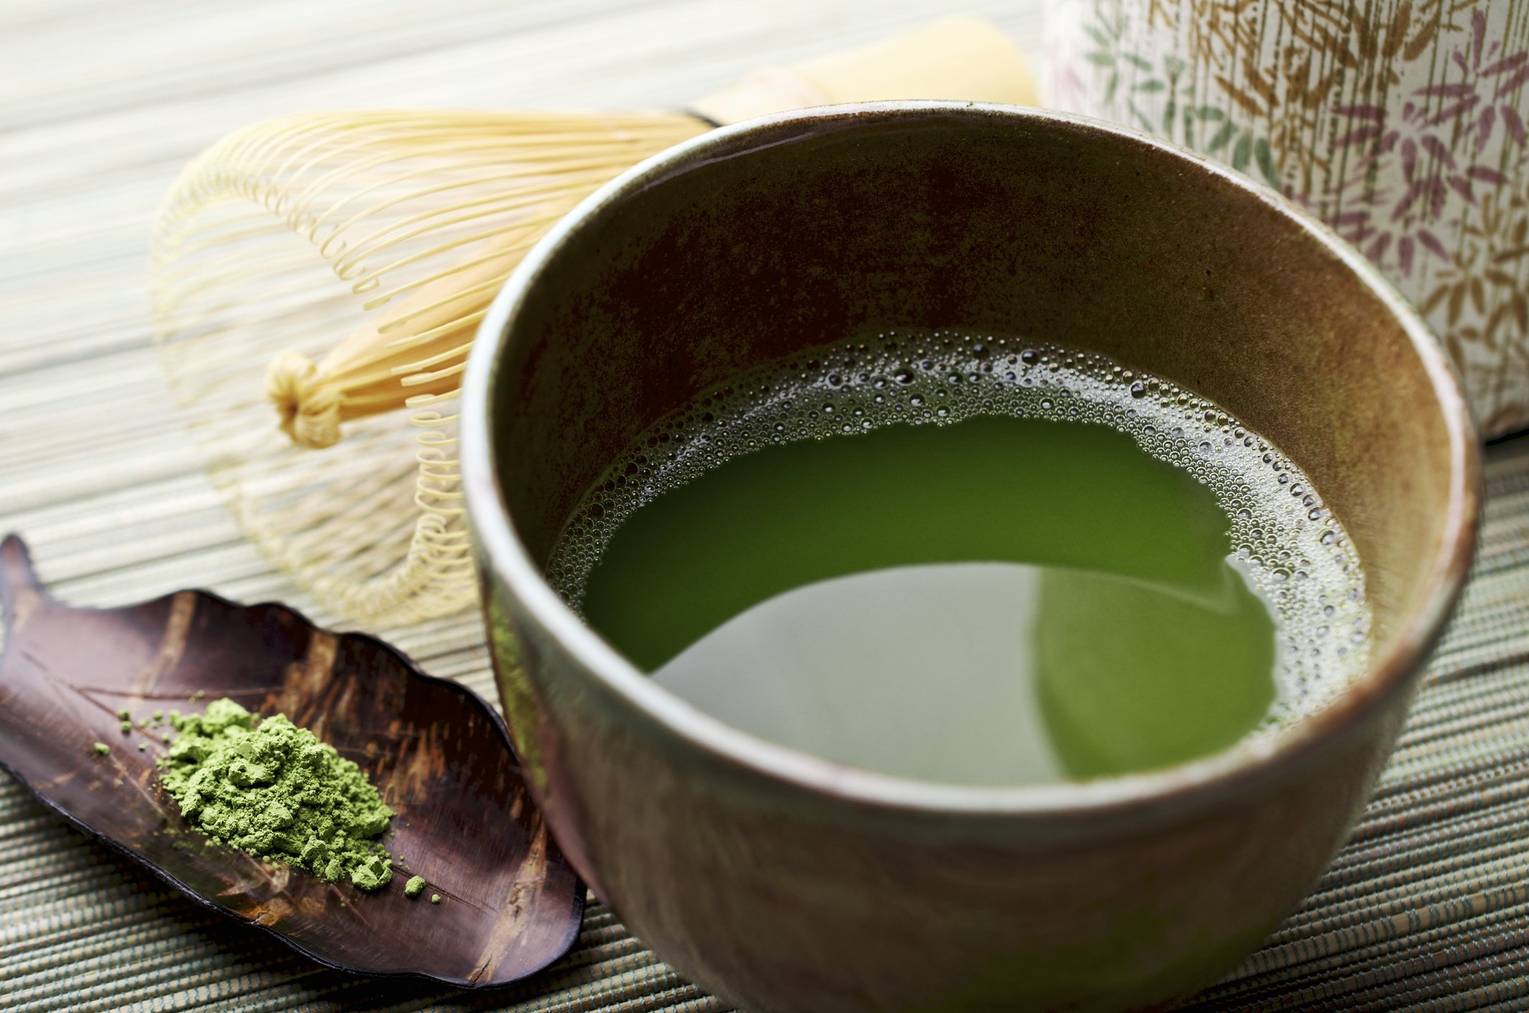 «SEVERAL MORE IN THIS SERIES. Freshly whisked powdered green tea (matcha) with cherrywood scoop, bamboo whisk and tea canister.  Very shallow DOF.»